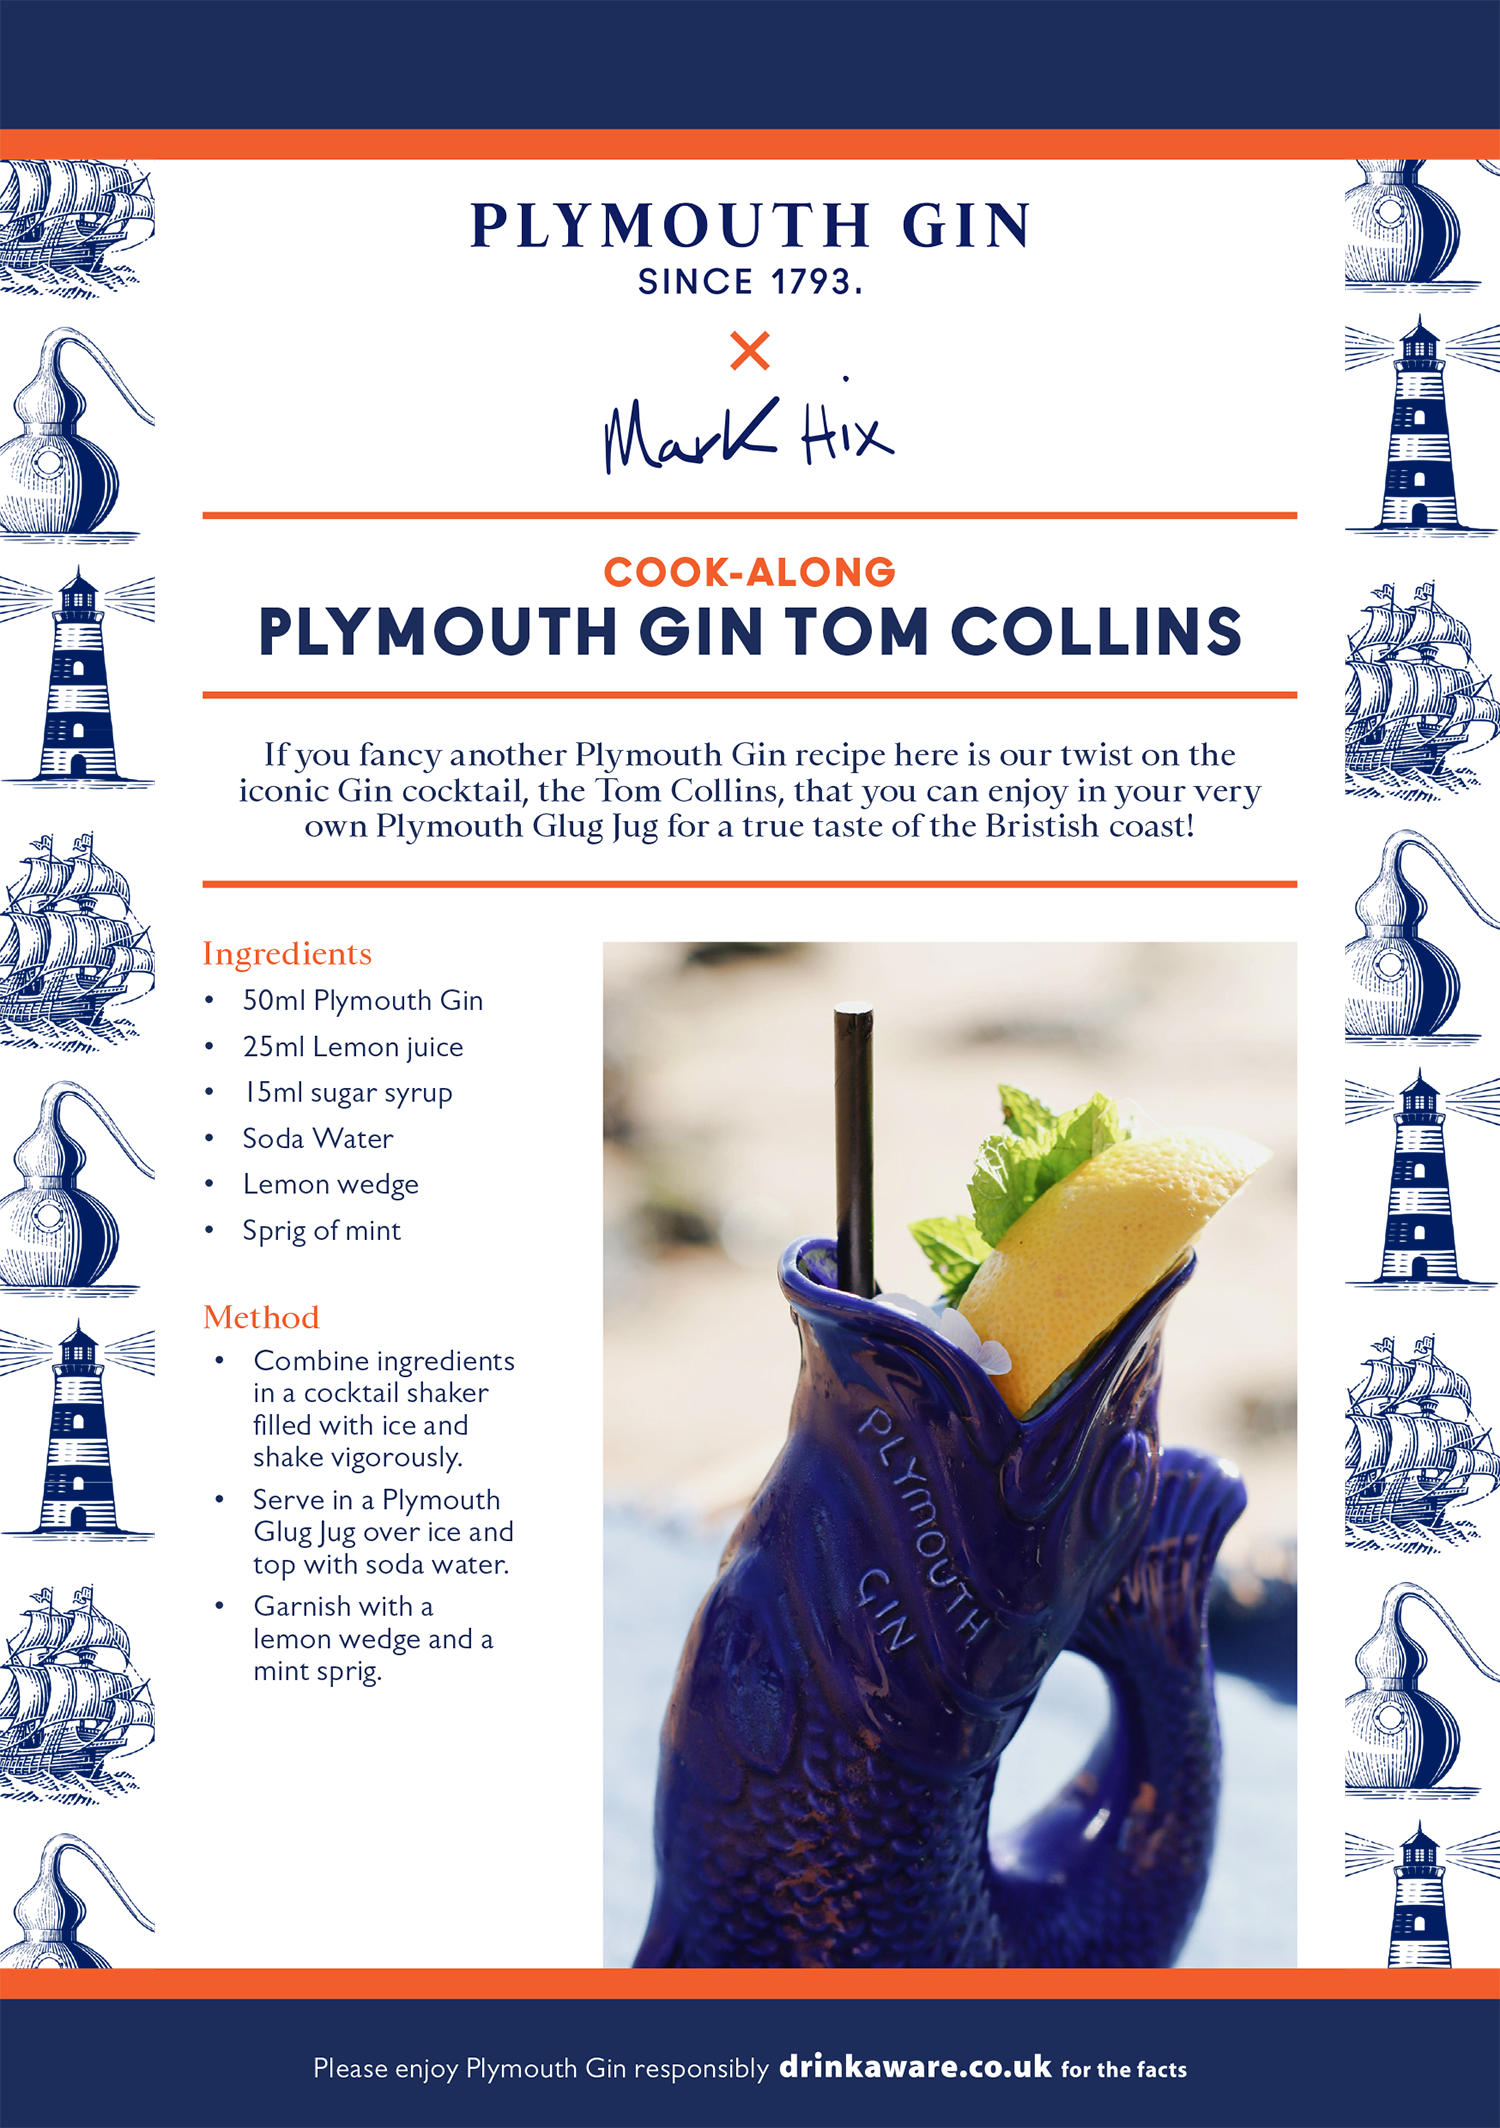 D002110A Plymouth Gin x Mark Hix Cook-along recipe cards_A5-4.png